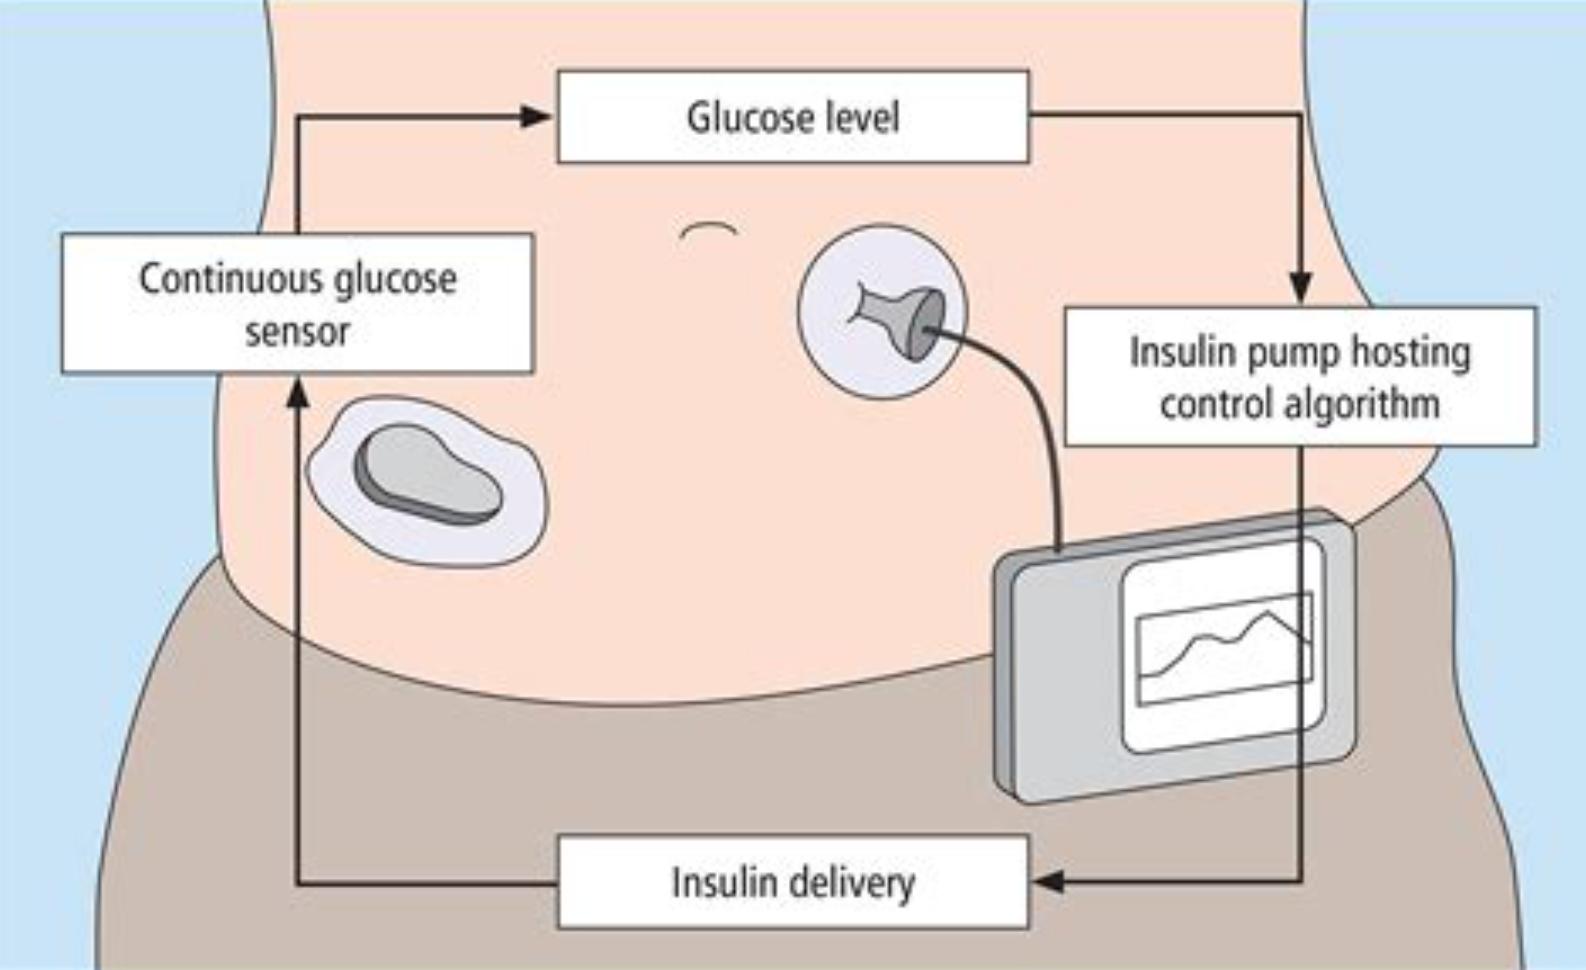 About Hybrid Closed Loop for T1D